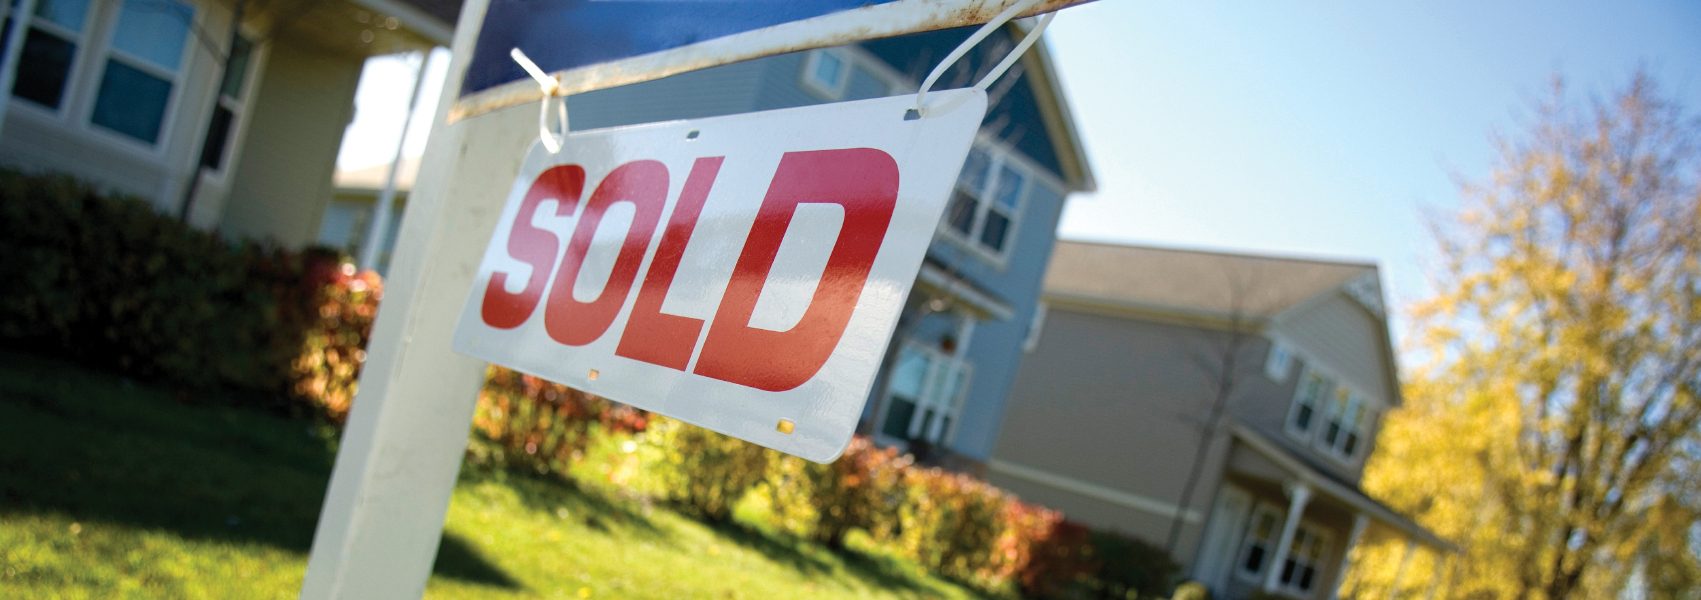 Selling your home in Hastings, Minnesota and the Minneapolis/St. Paul area